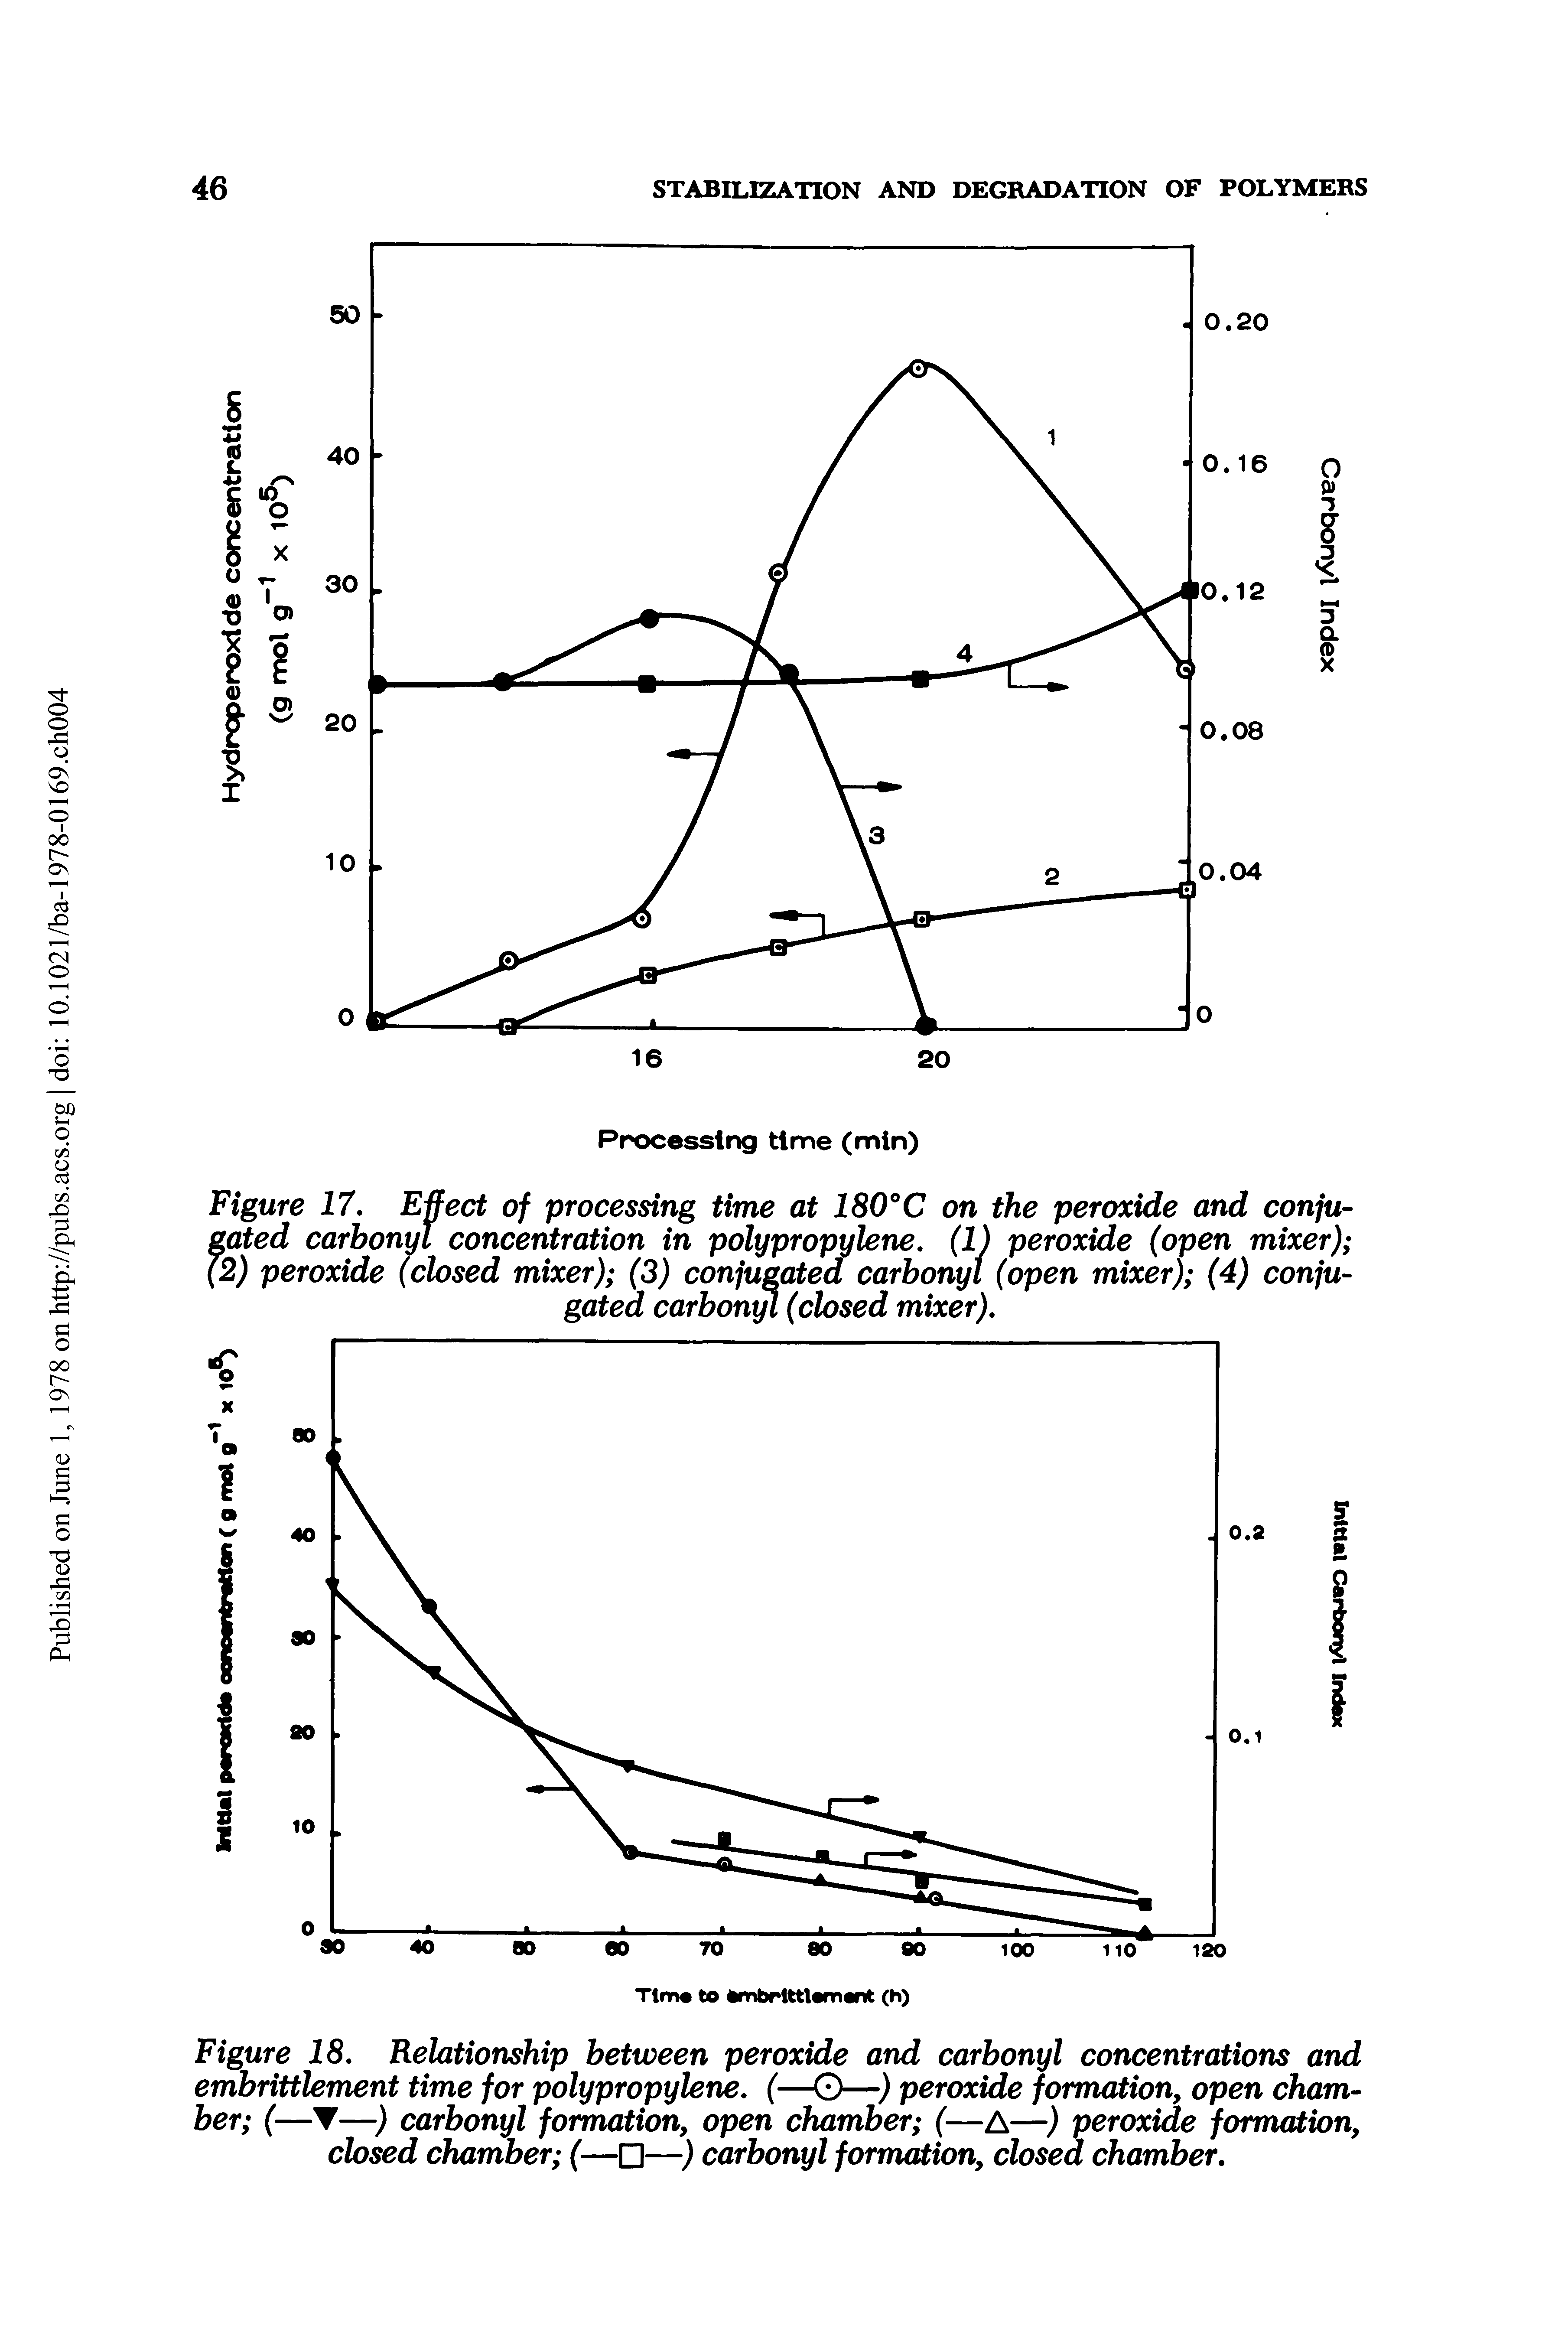 Figure 17. Effect of processing time at 180°C on the peroxide and conjugated carbonyl concentration in polypropylene. (1) peroxide (open mixer) (2) peroxide (closed mixer) (3) conjugated carbonyl (open mixer) (4) conjugated carbonyl (closed mixer).